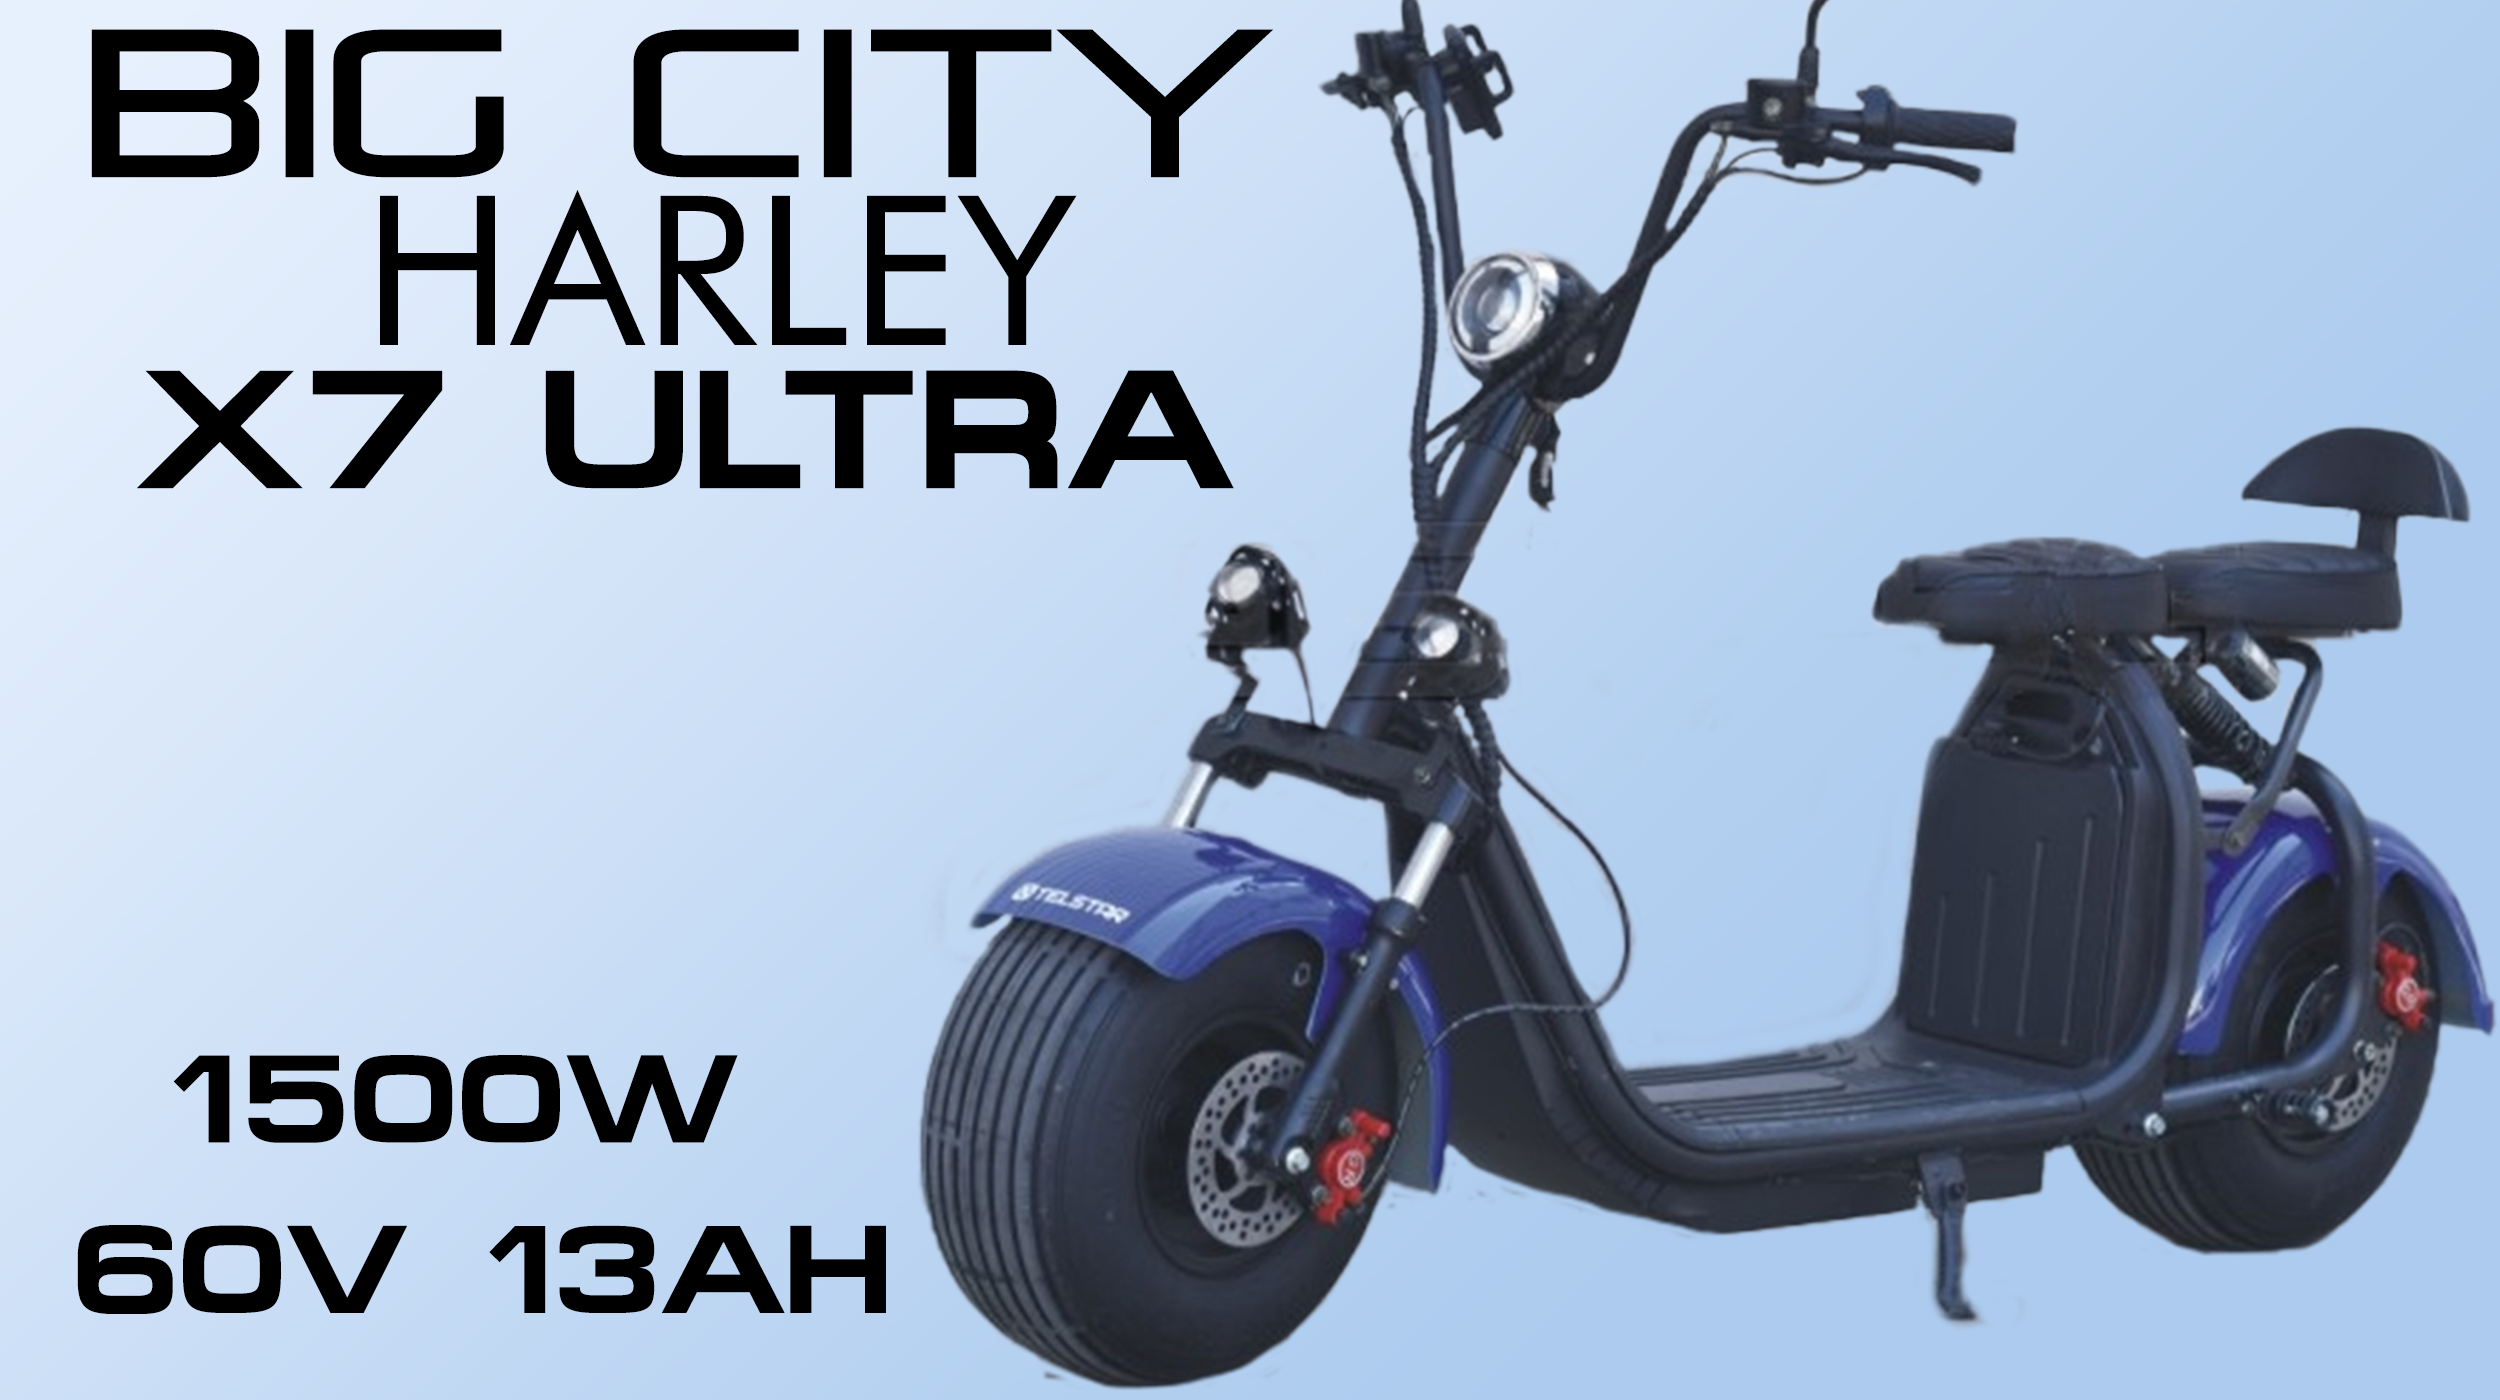 Electric scooter BIG CITY HARLEY X7 ULTRA 1500W 60V 13Ah with LED headlights